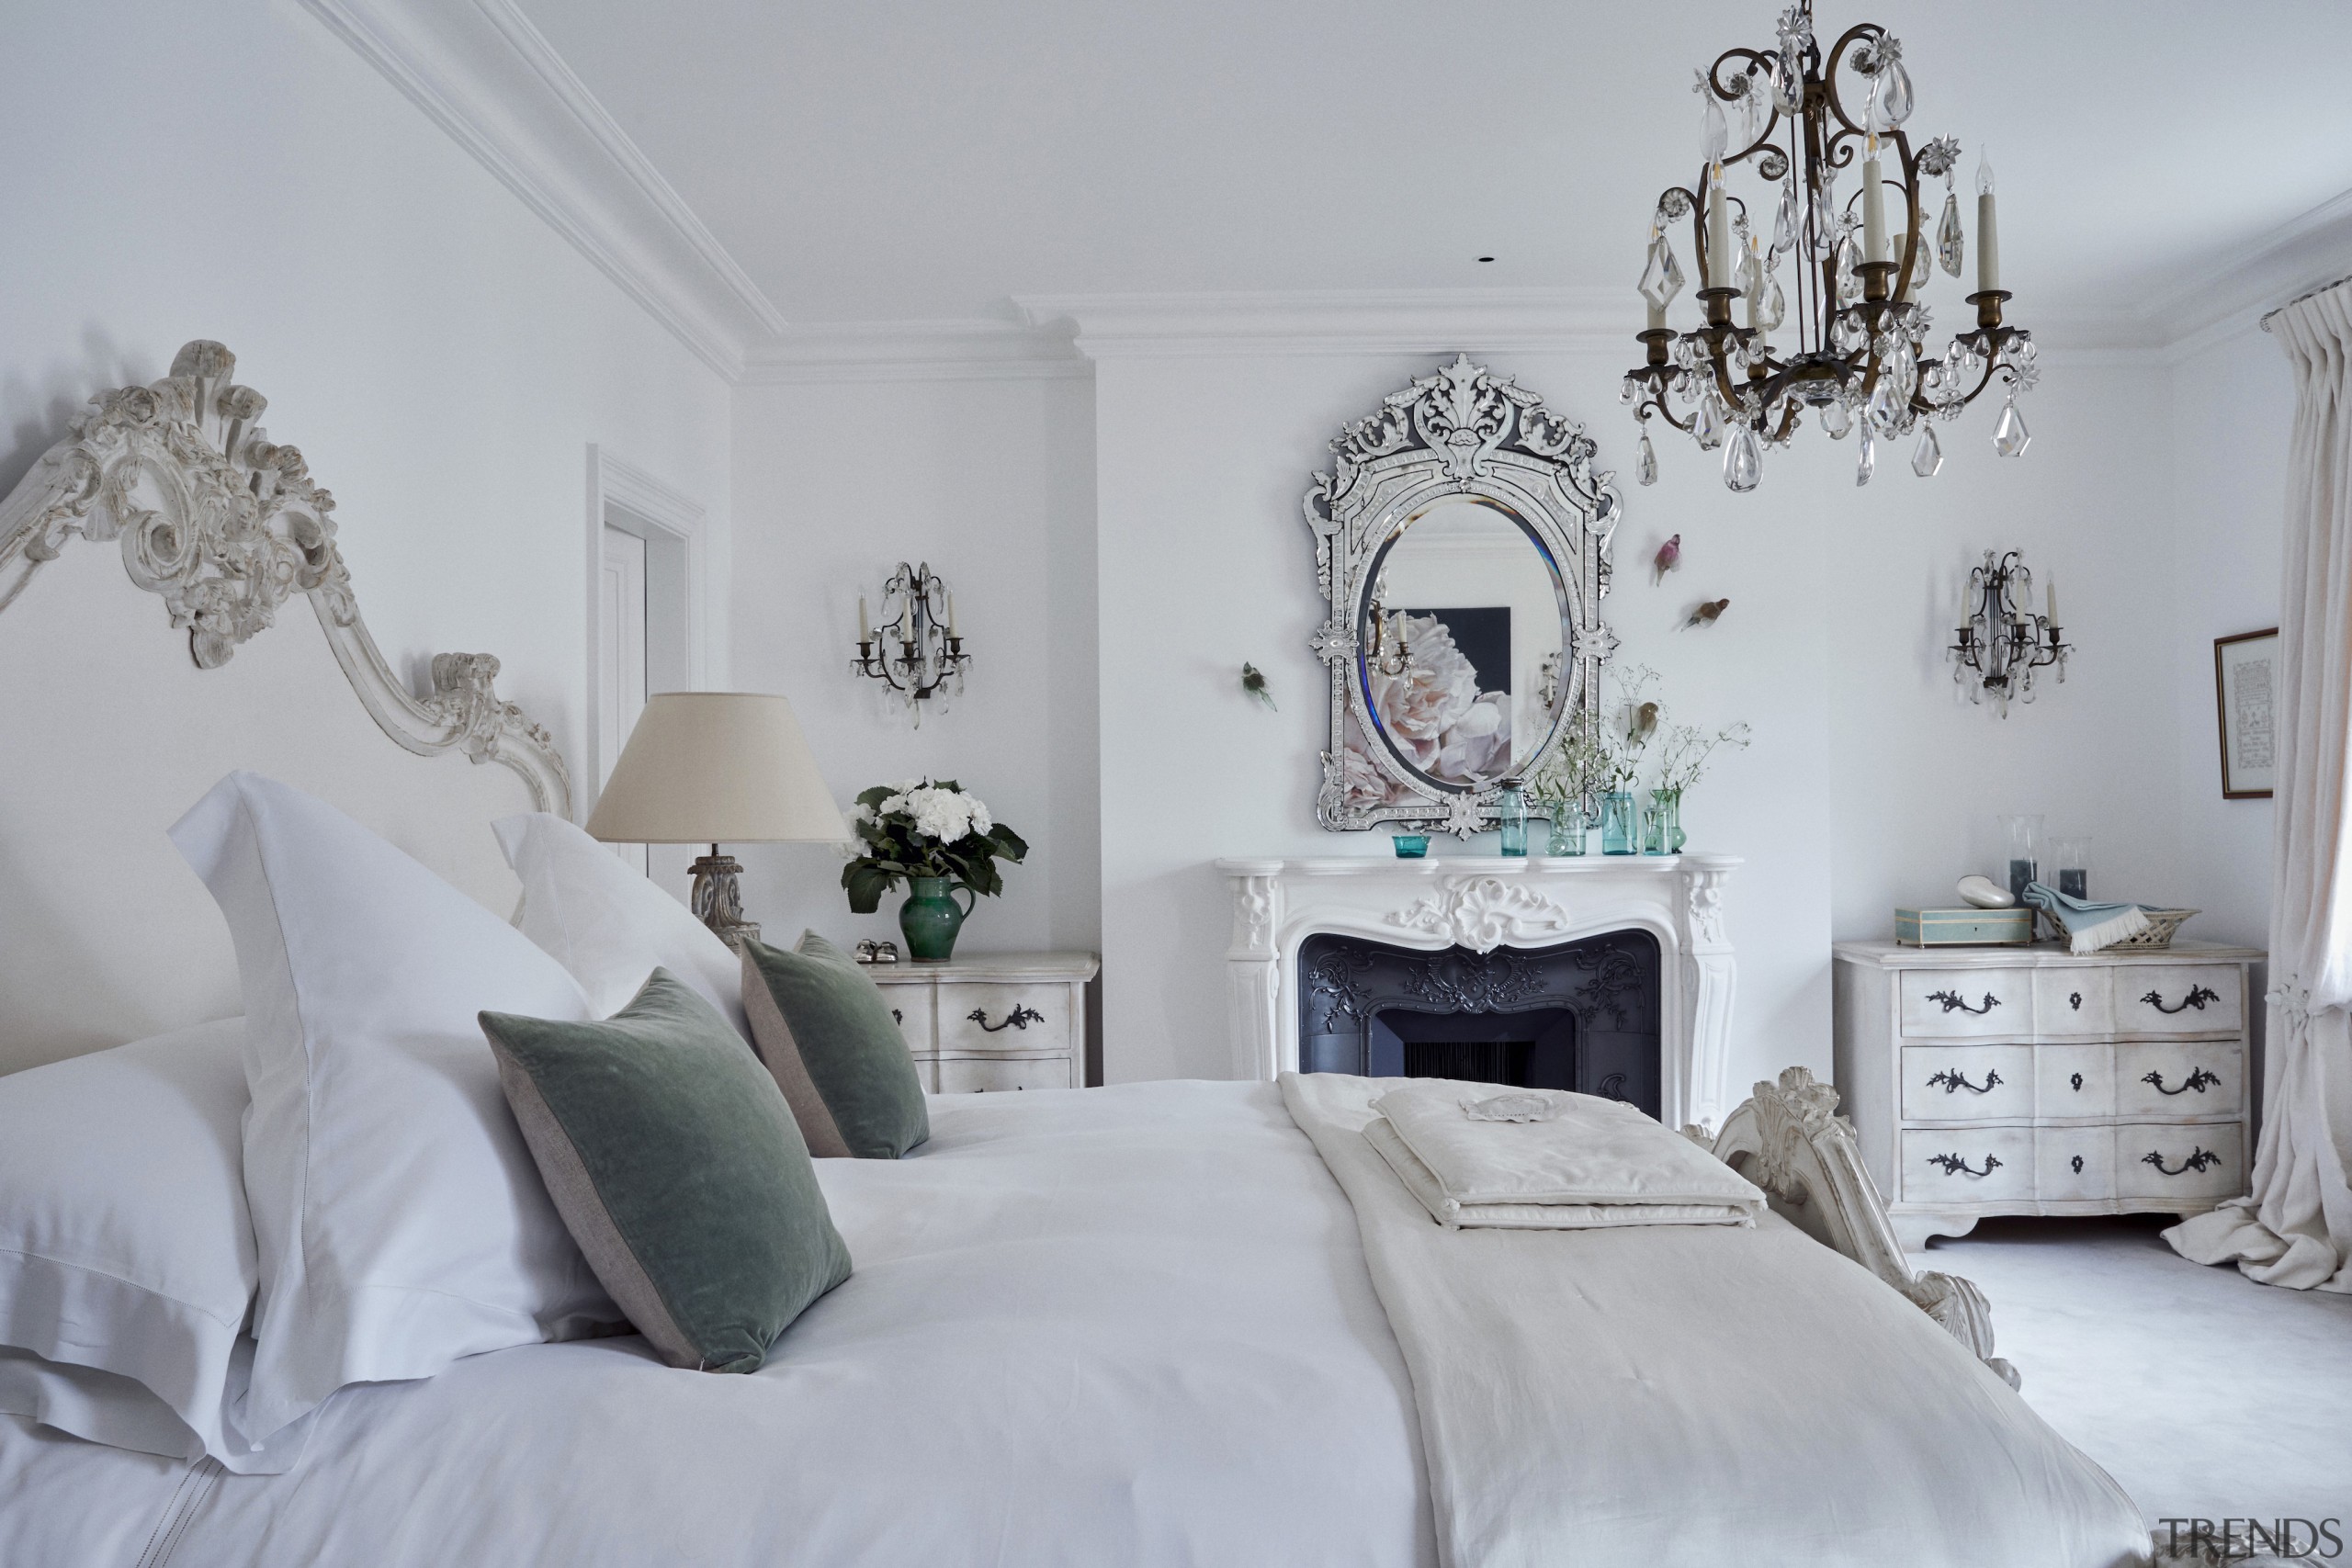 The sumptuous master bedroom. - Chatting across the 